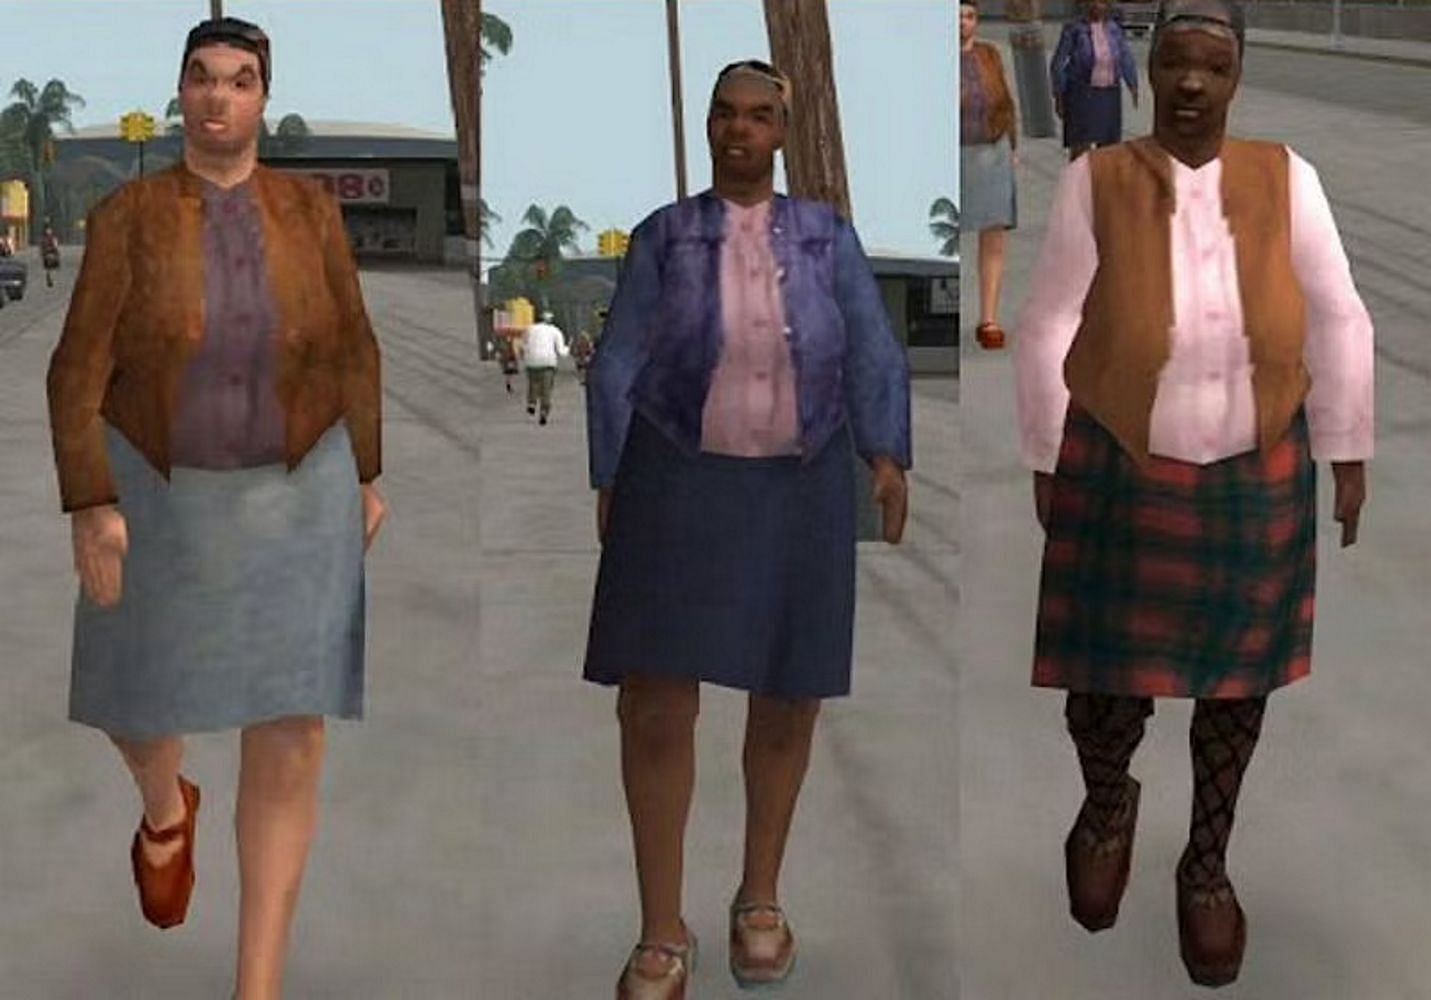 An example of what this GTA San Andreas mod does (Image via MixMods.com.br)